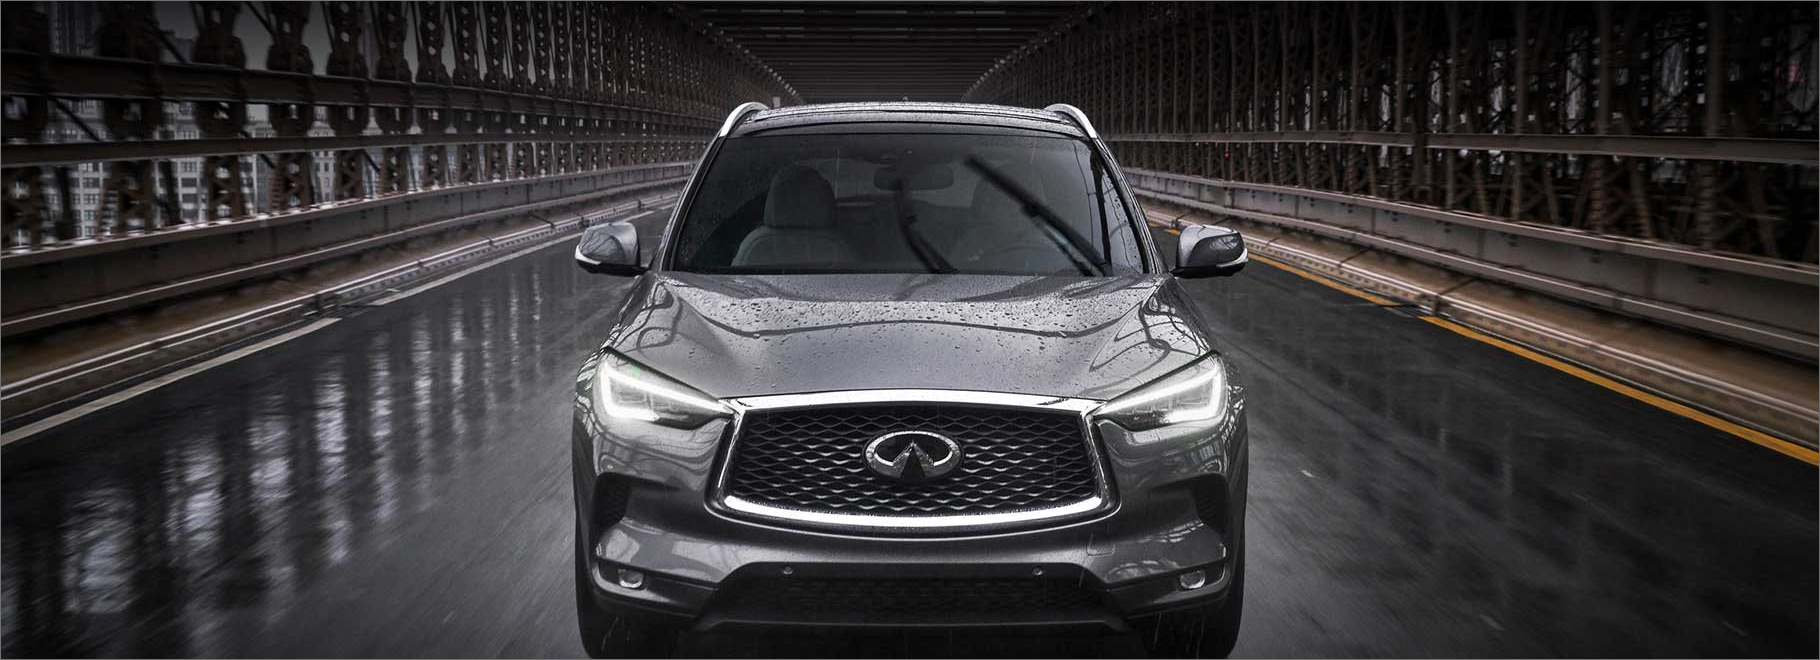 The 2022 INFINITI QX50 is a stylish SUV inside and out. It's the perfect family SUV. Drive it for yourself at Louisville INFINITI today.